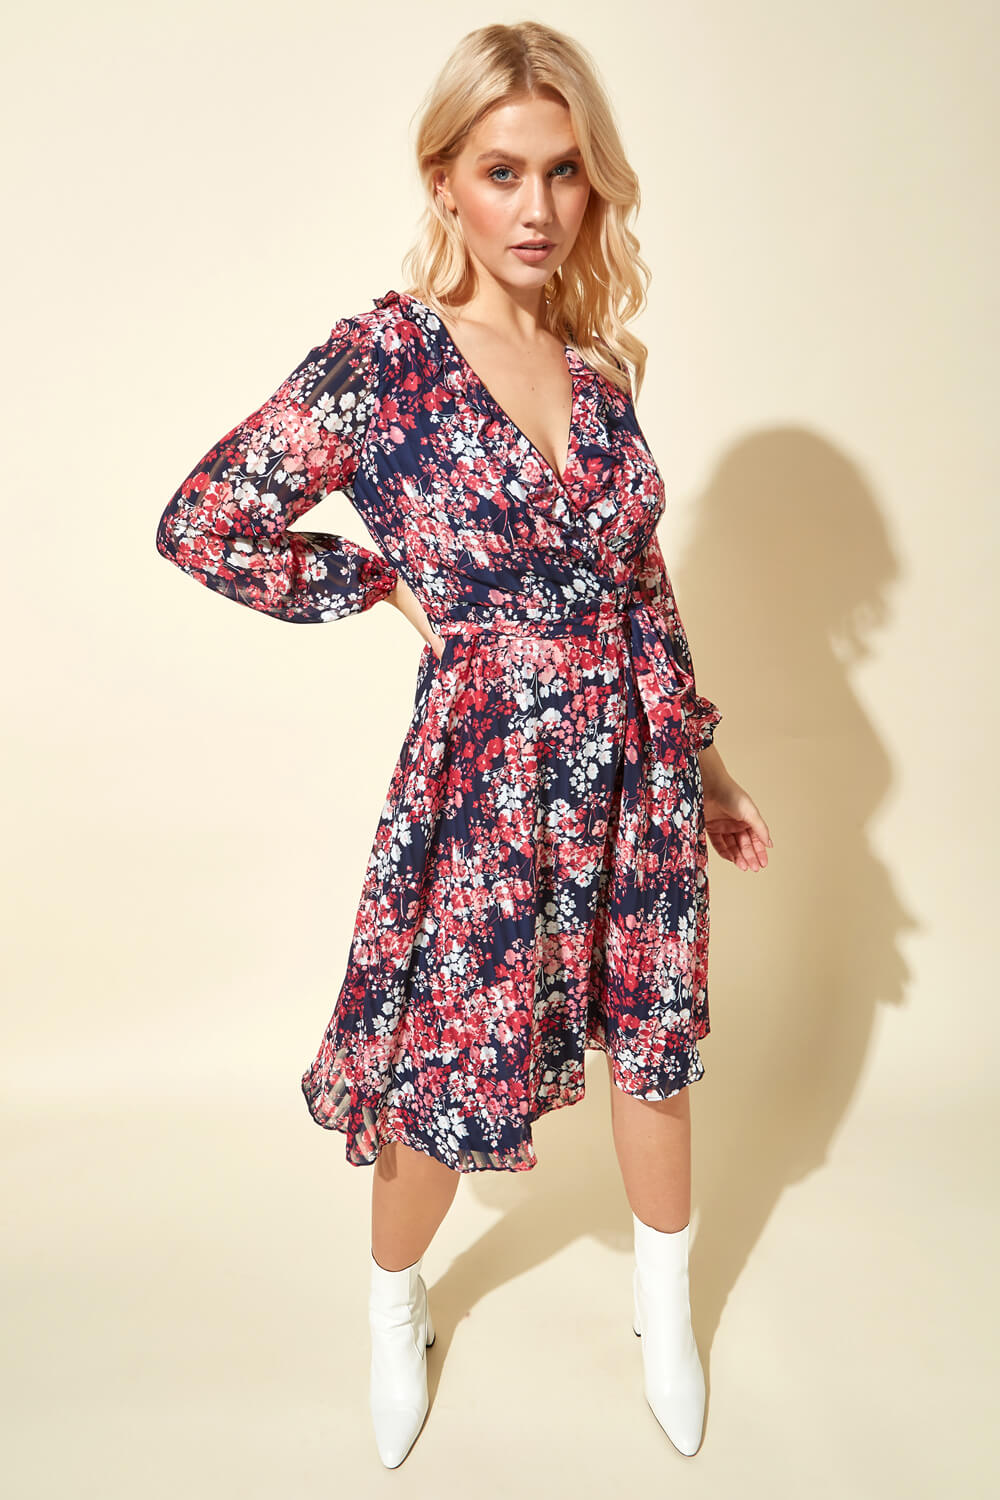 PINK Ditsy Floral Print Wrap Dress, Image 3 of 4